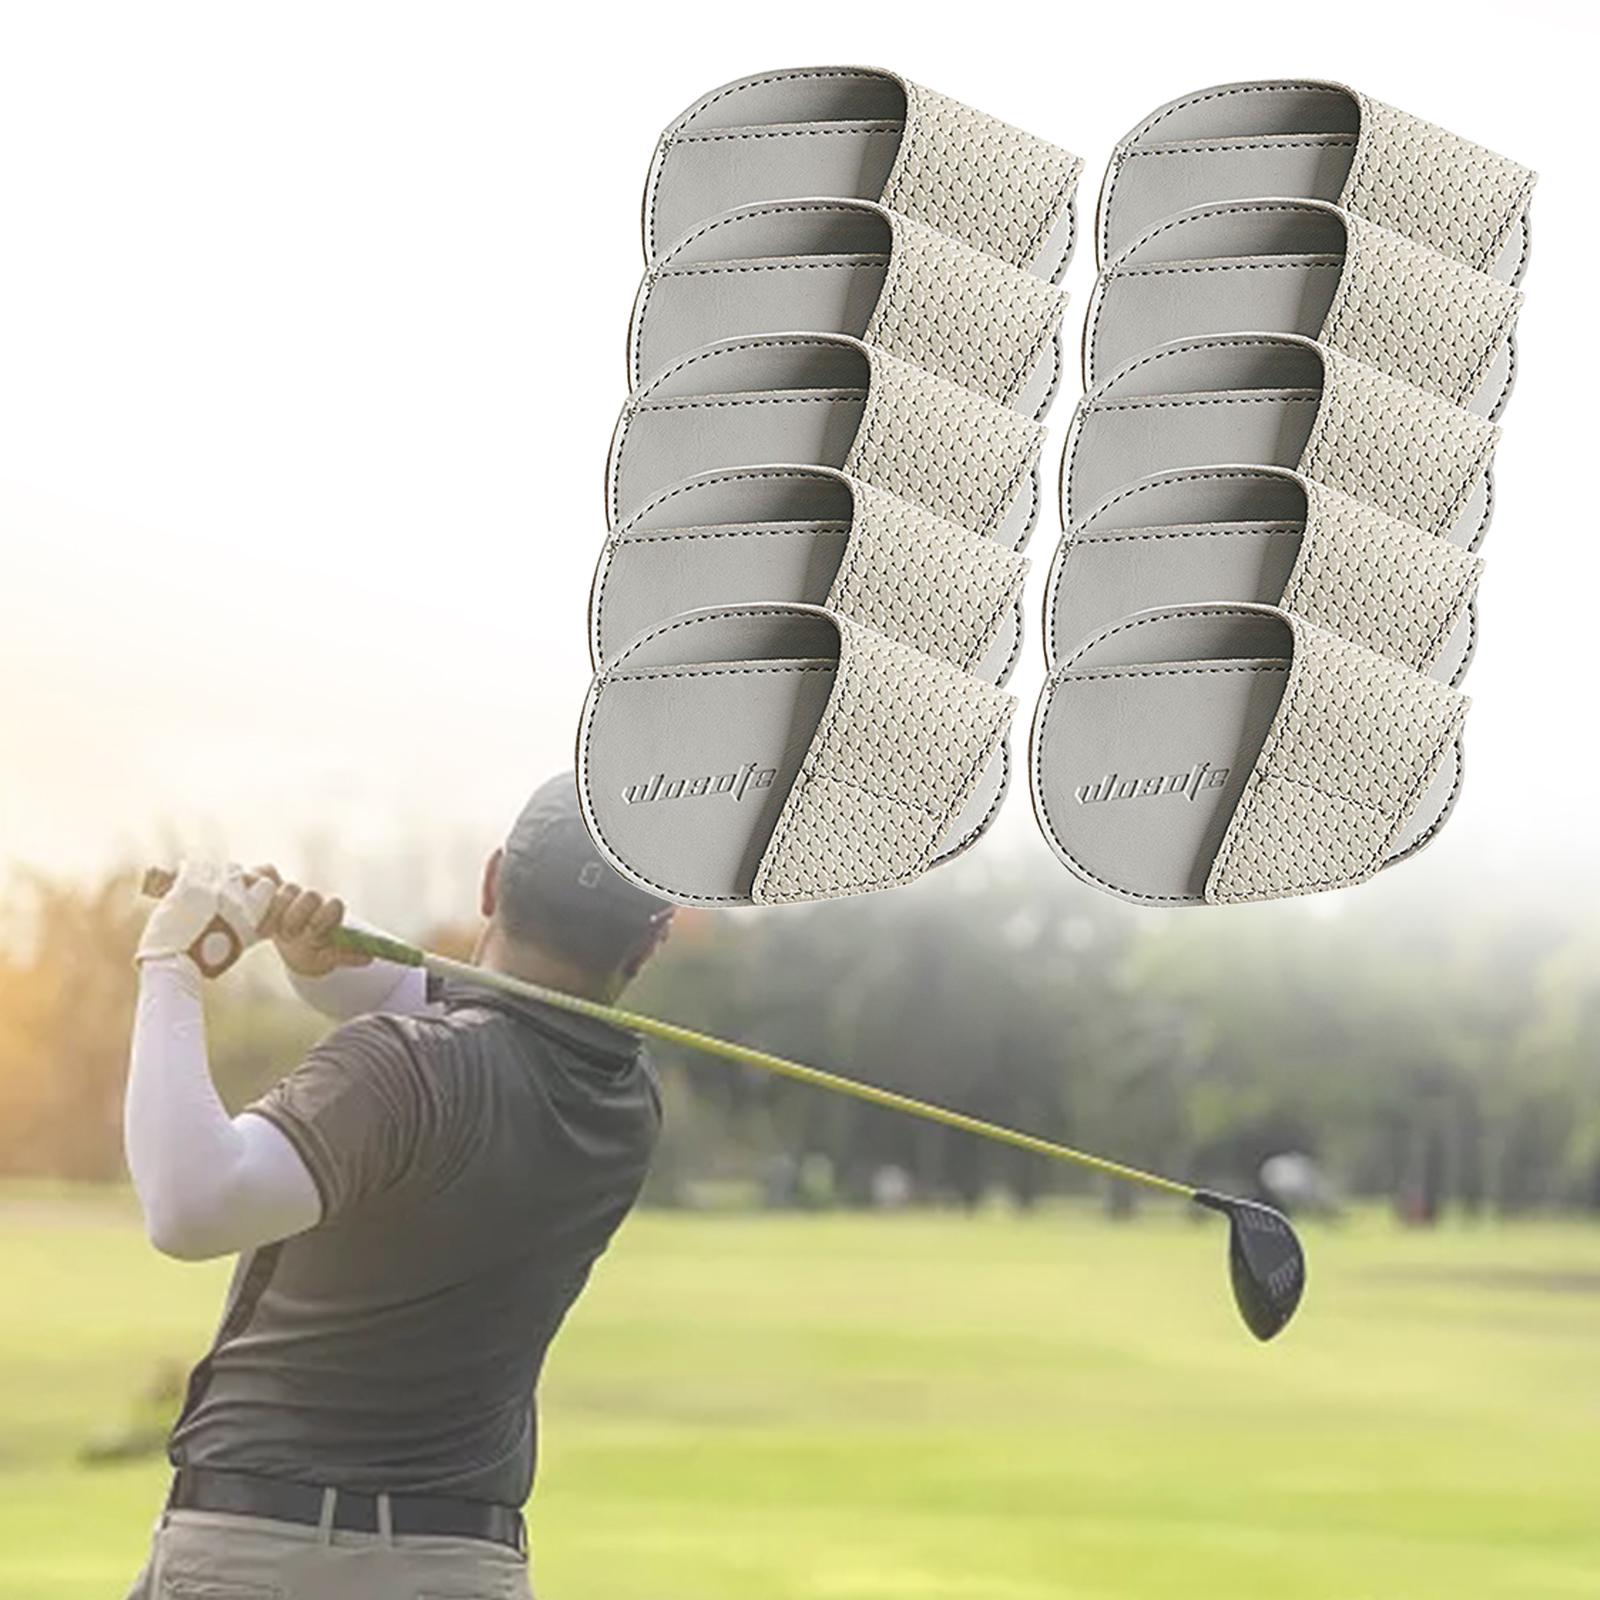 Golf Head Covers PU Portable Protector for Athlete Travel Golf Training Gray Large